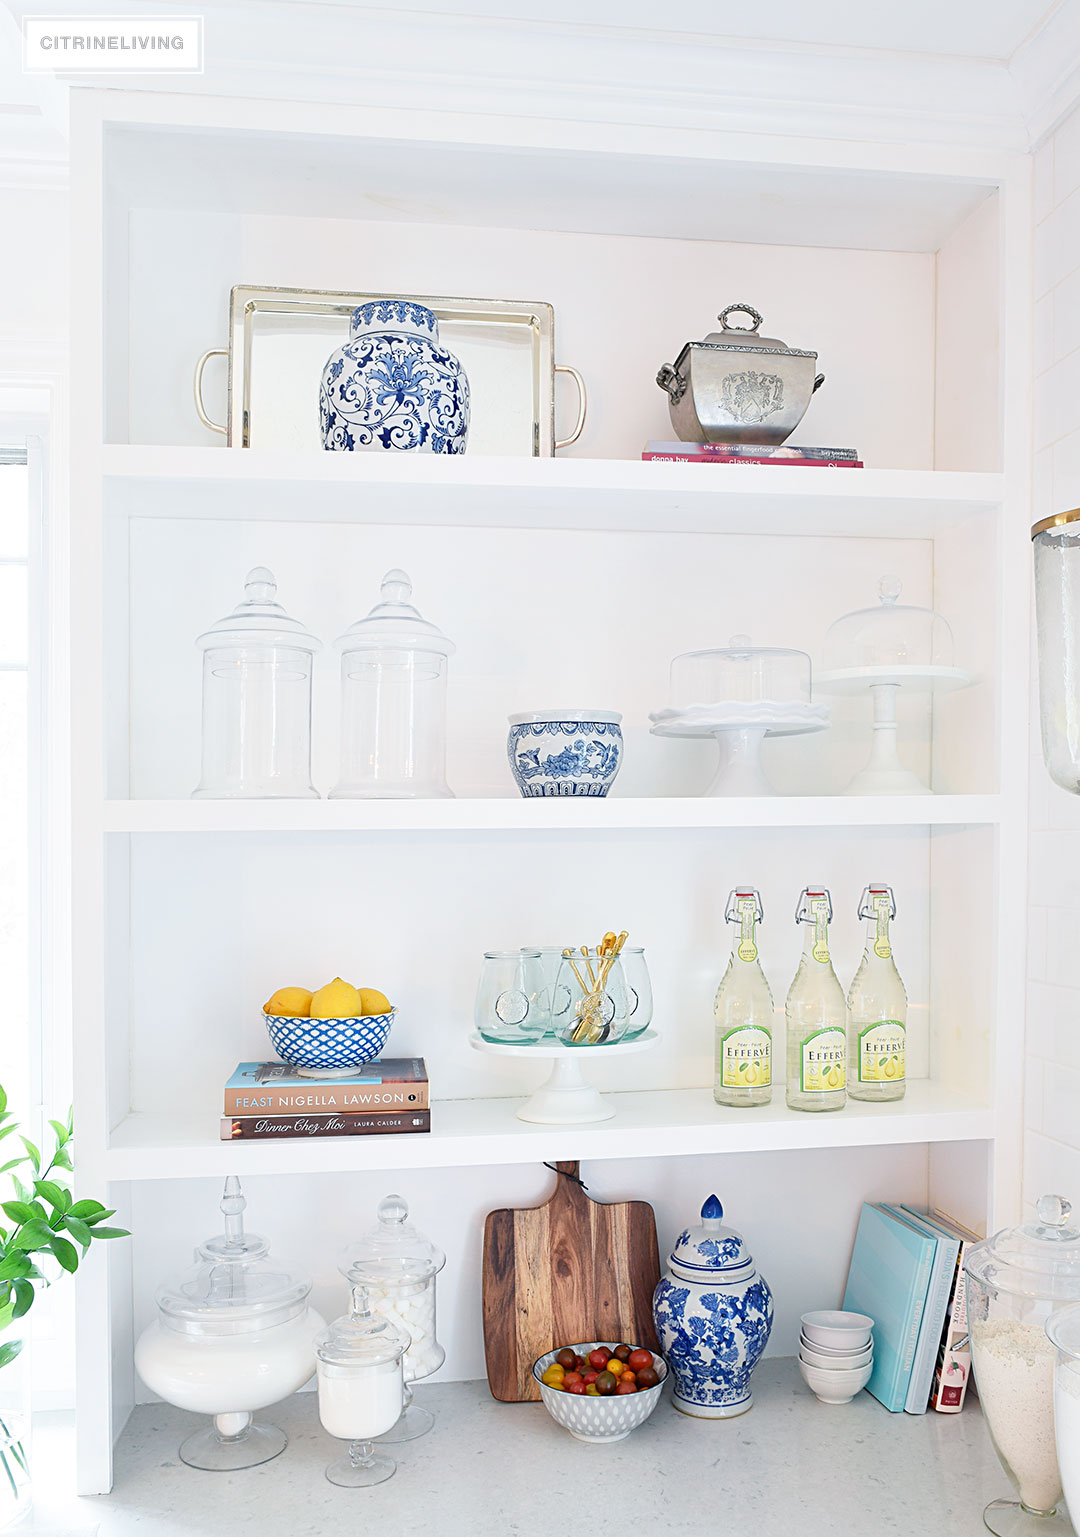 Create a curated, collected, artisanal look on your kitchen shelves with a mix of cookbooks, wood, glass, blue and white, and gourmet inspired accents.